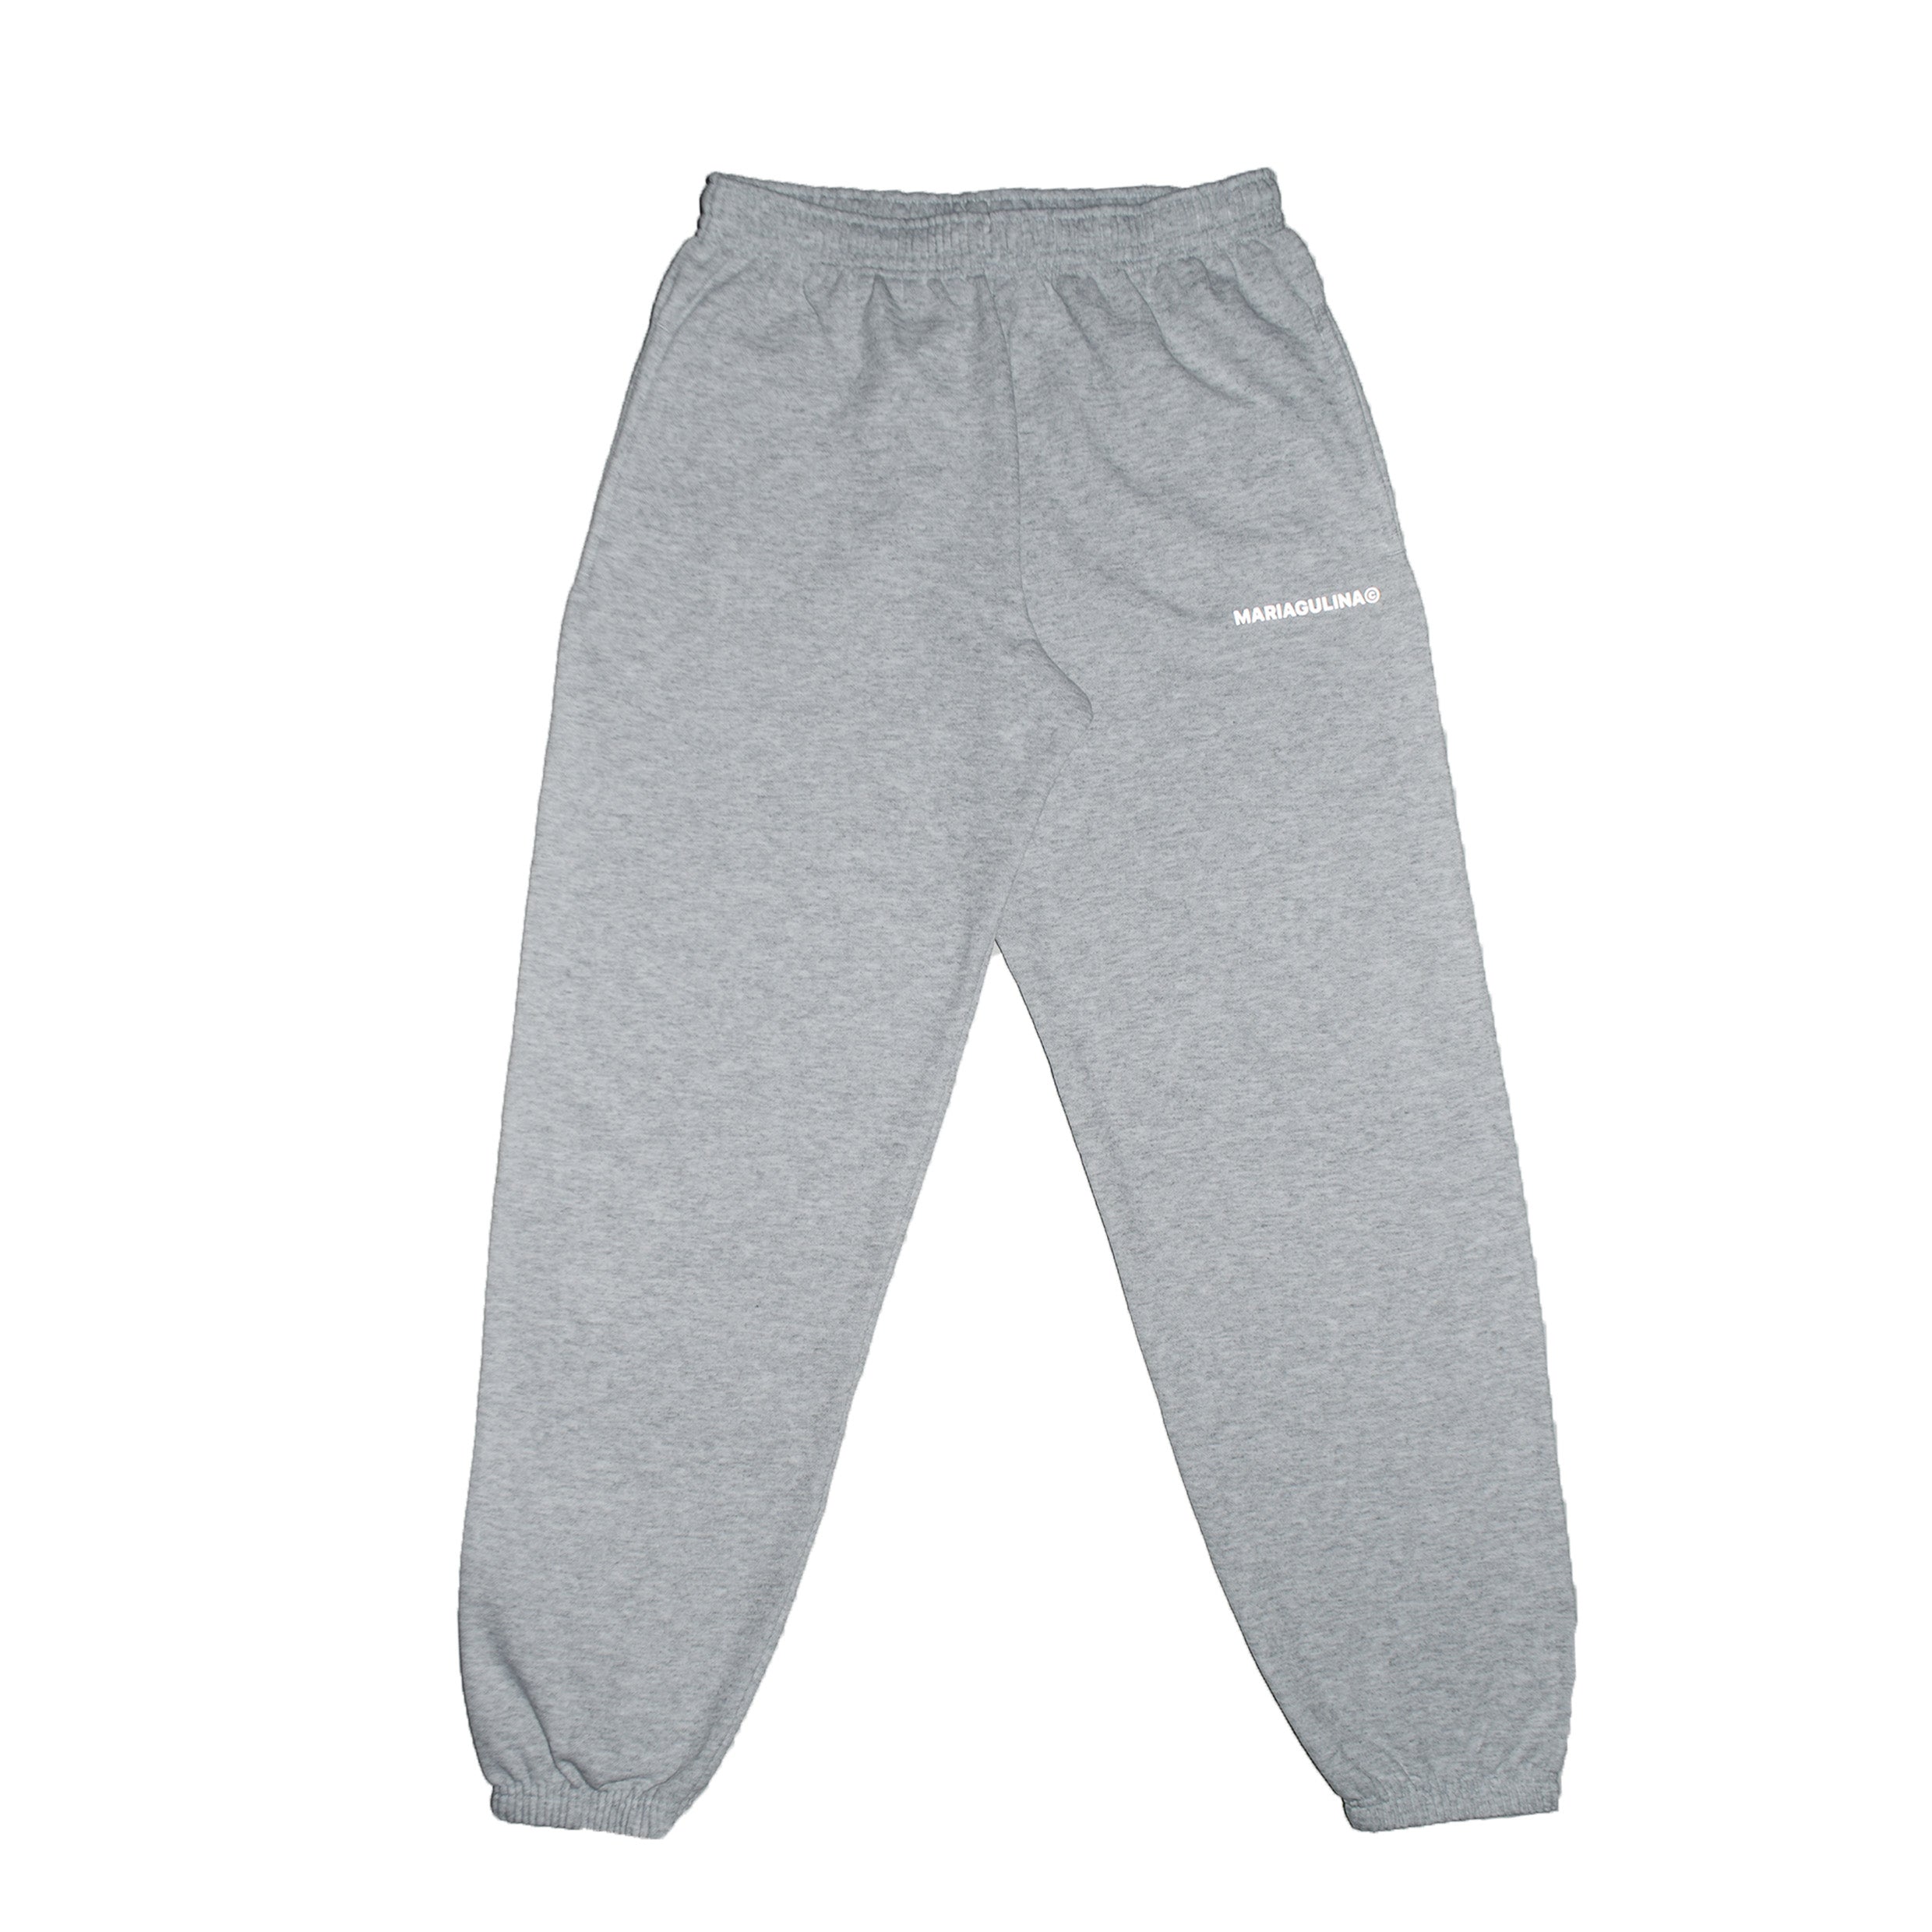 Kick Back Distressed Joggers in Heather Gray – Gina Marie's Brown